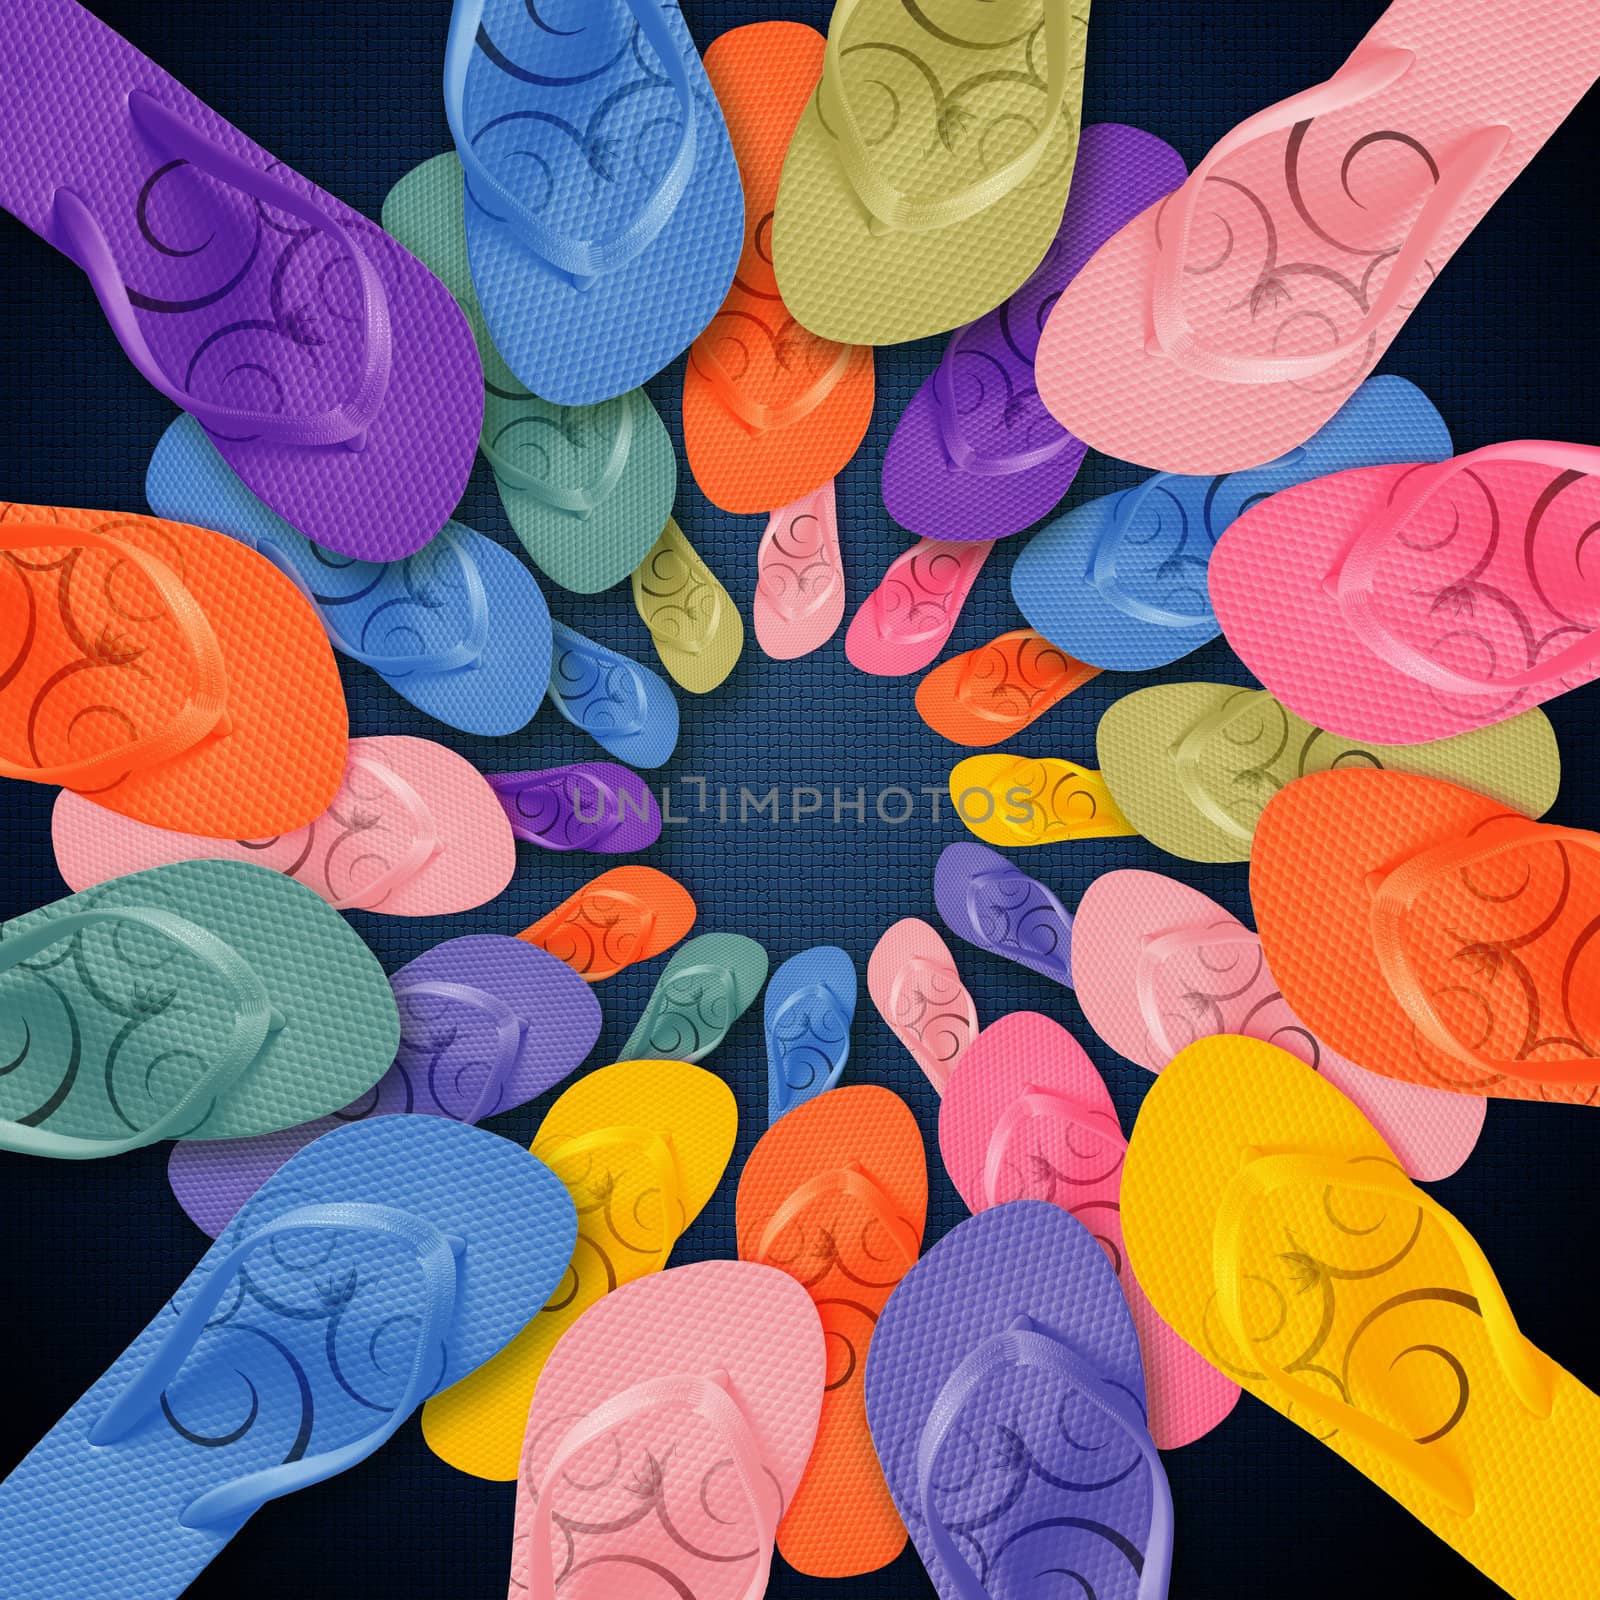 Colorful Flip Flops on circle shape by designsstock